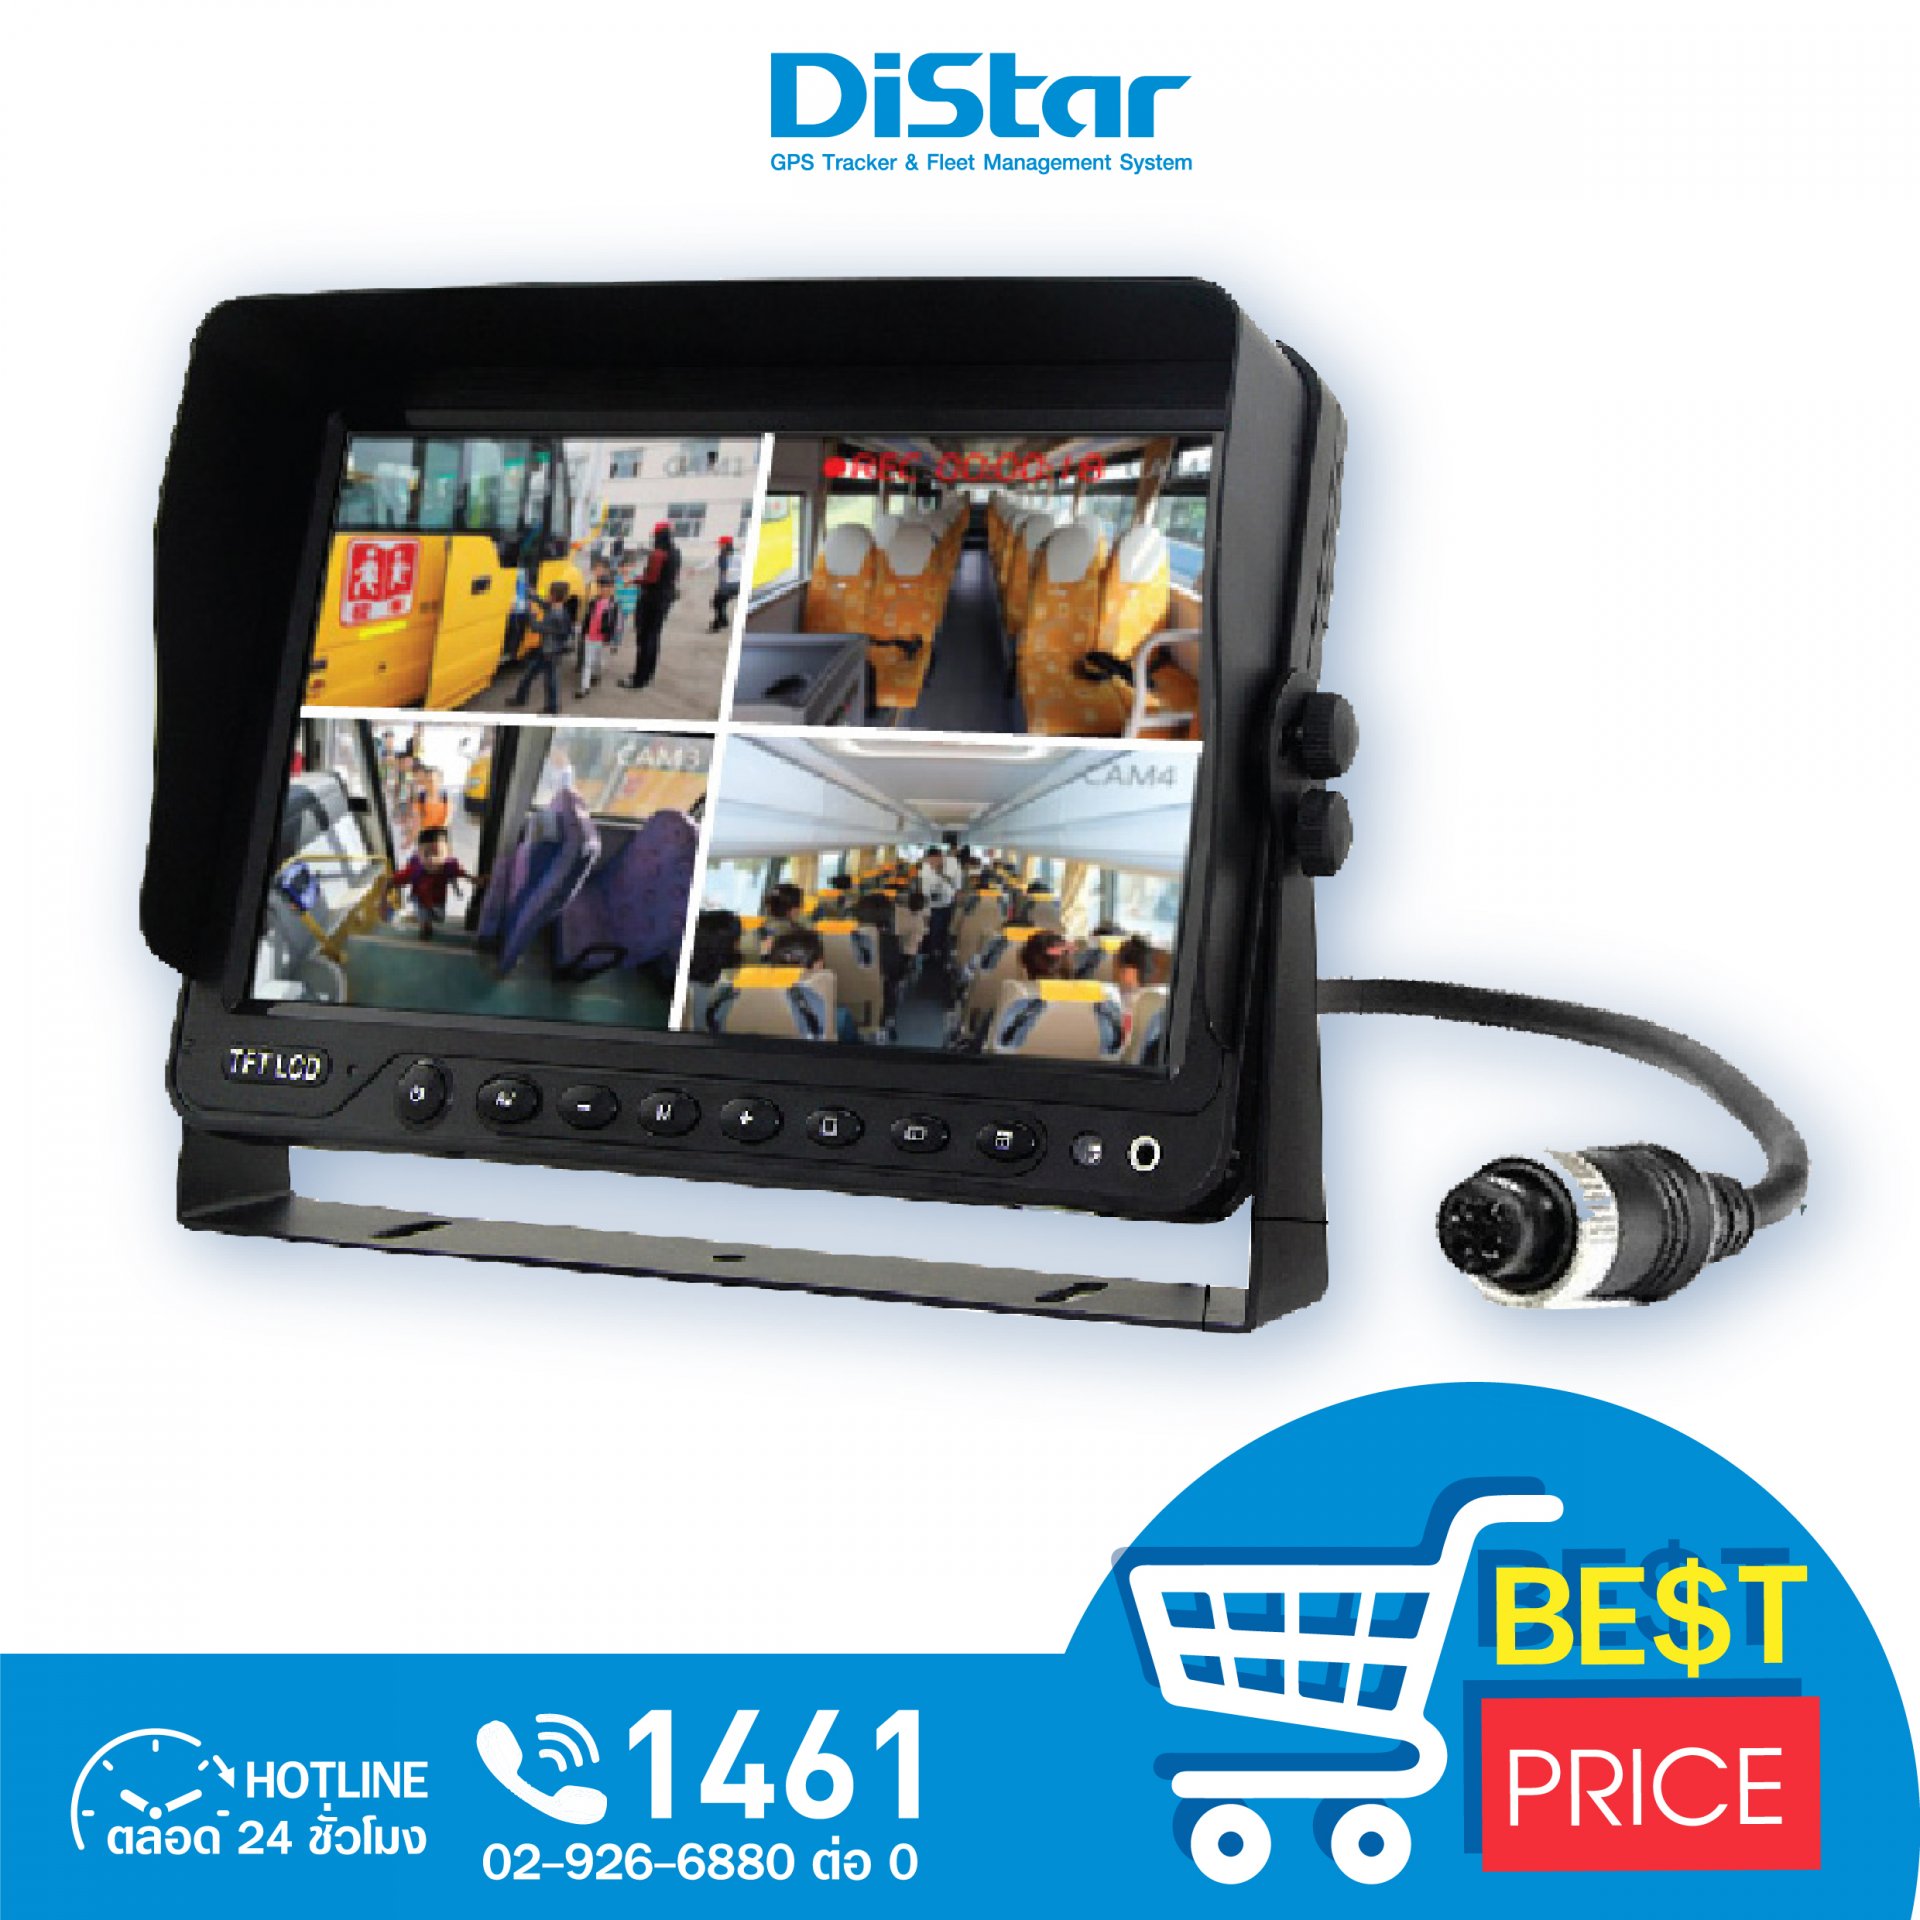 Distar camera recording set, 7-inch screen, resolution 1024x600 Pixel, supports connecting 4 cameras, model MD-M400SD